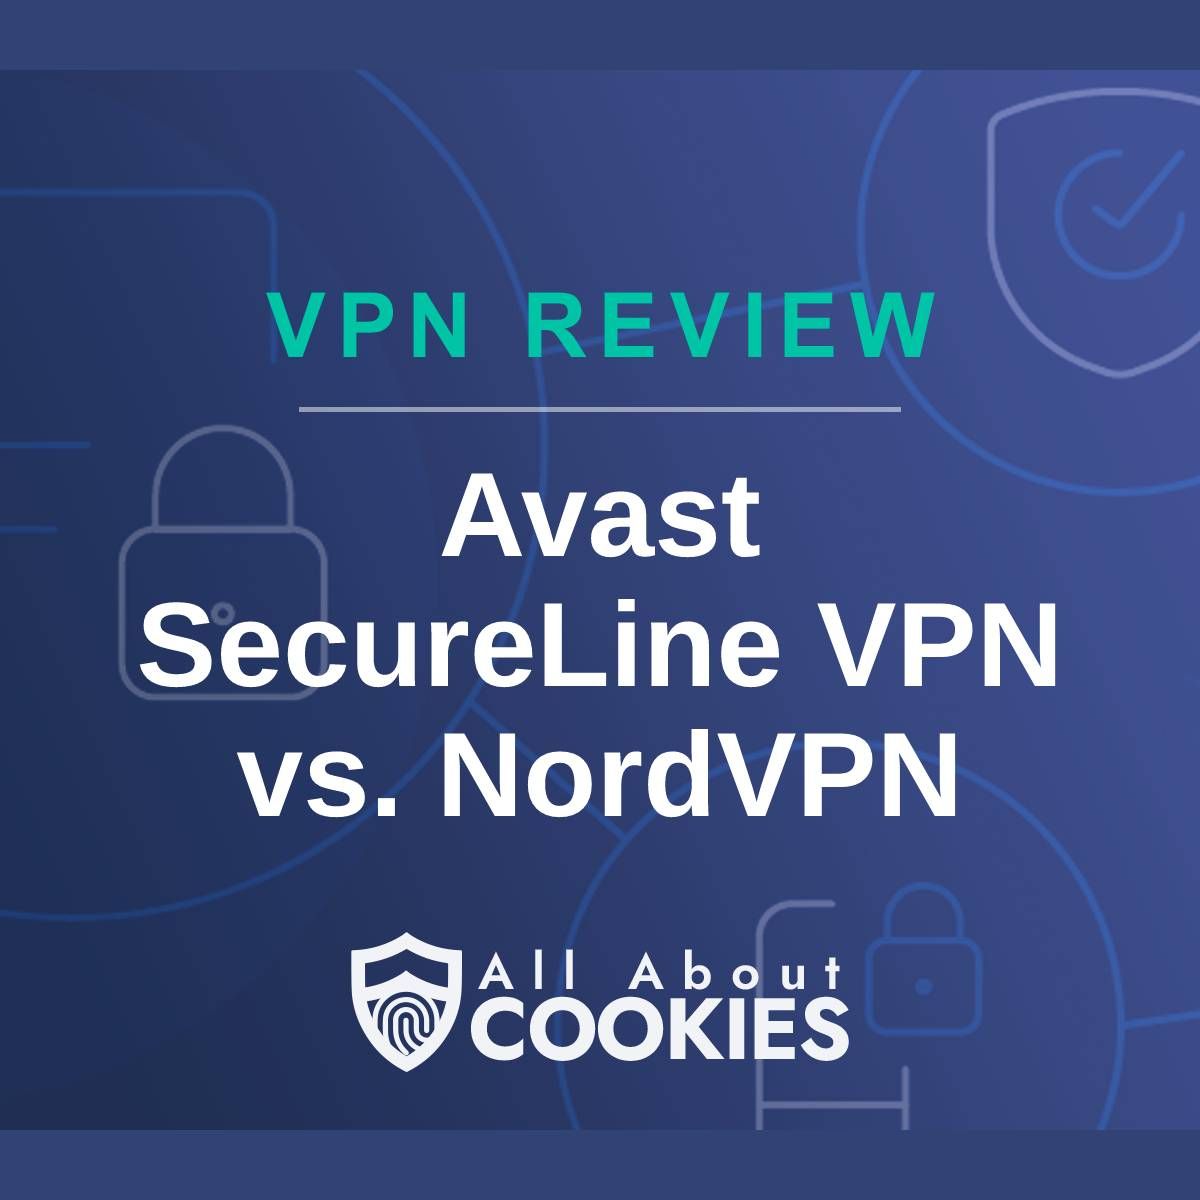 A blue background with images of locks and shields with the text &quot;VPN Review Avast SecureLine VPN vs. NordVPN&quot; and the All About Cookies logo. 